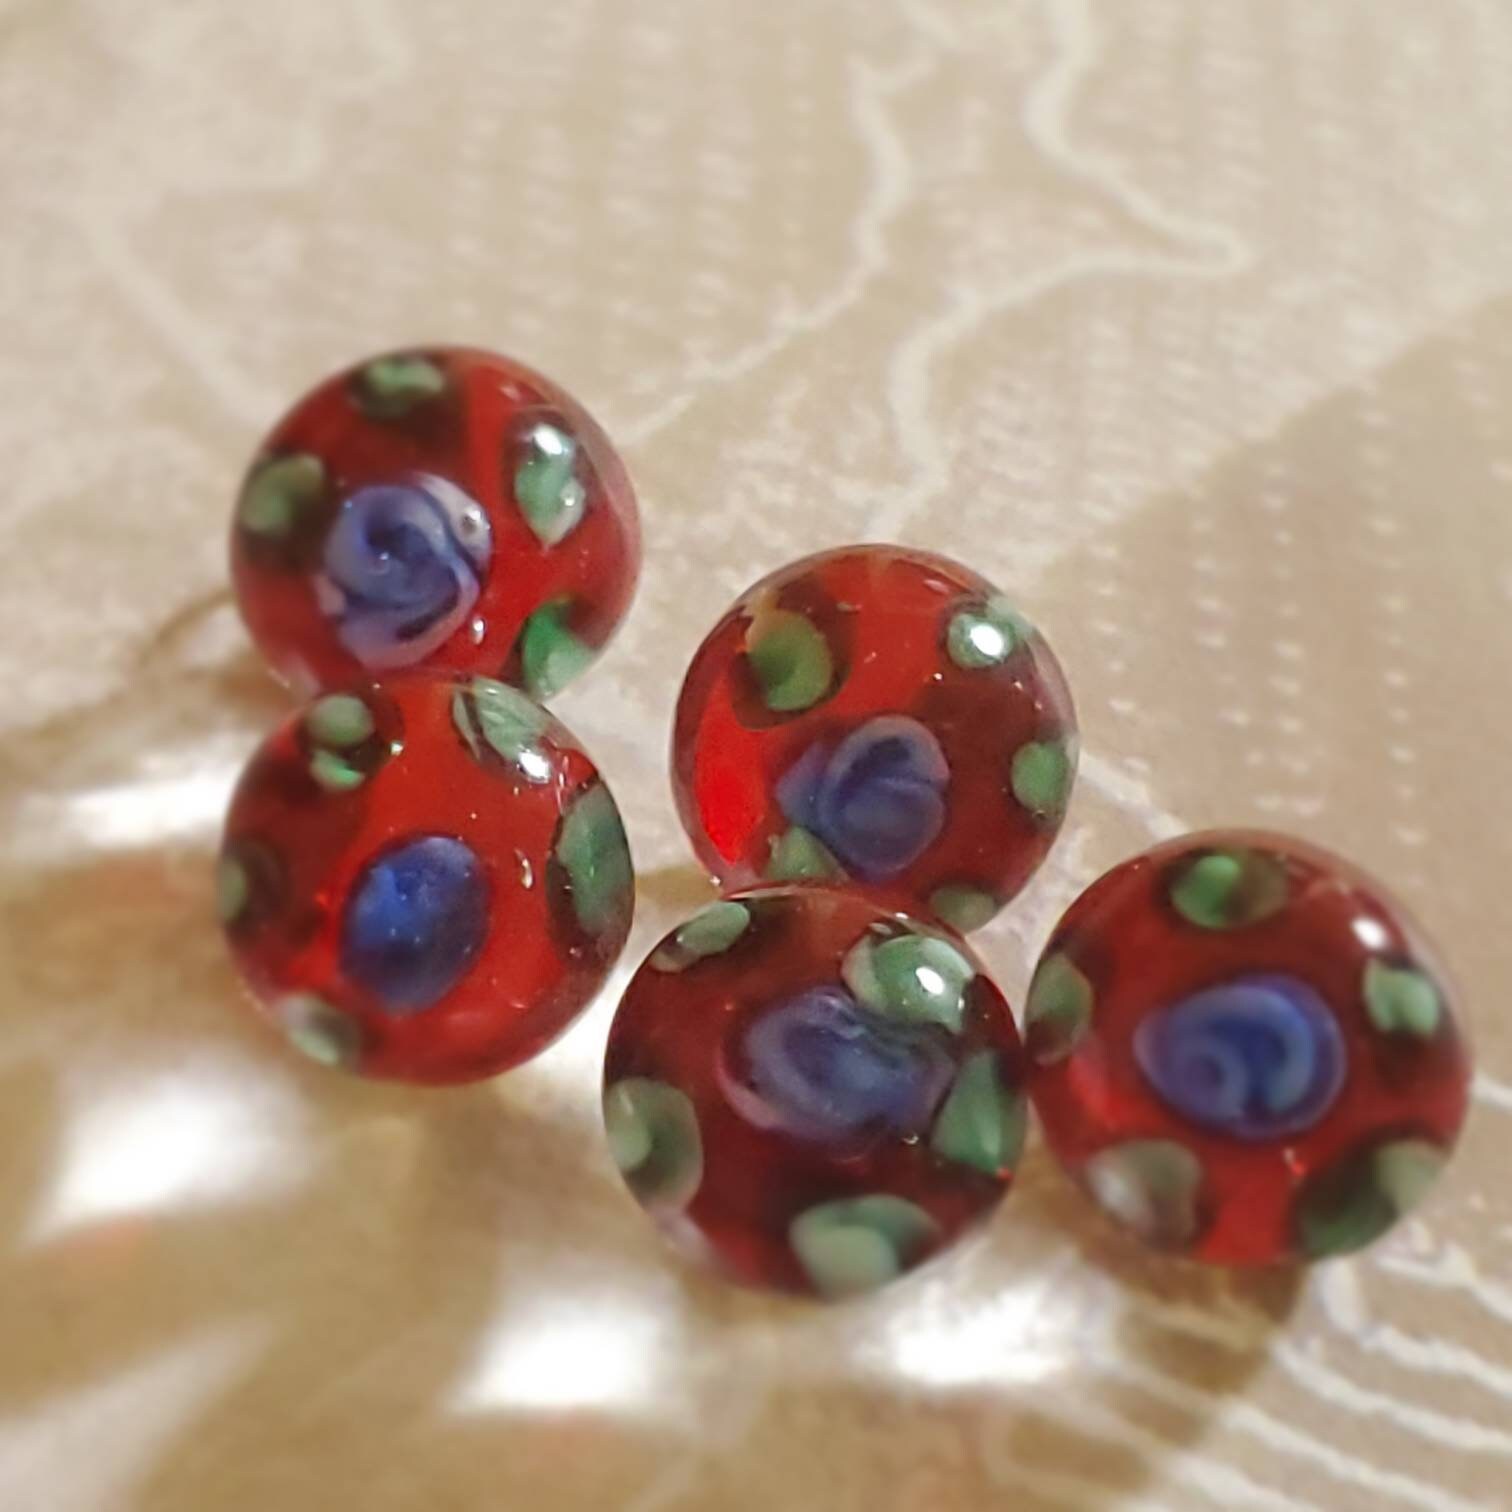 11 Vintage 2-Hole Half Domed Jewel Tone Red Diminutive Small Buttons